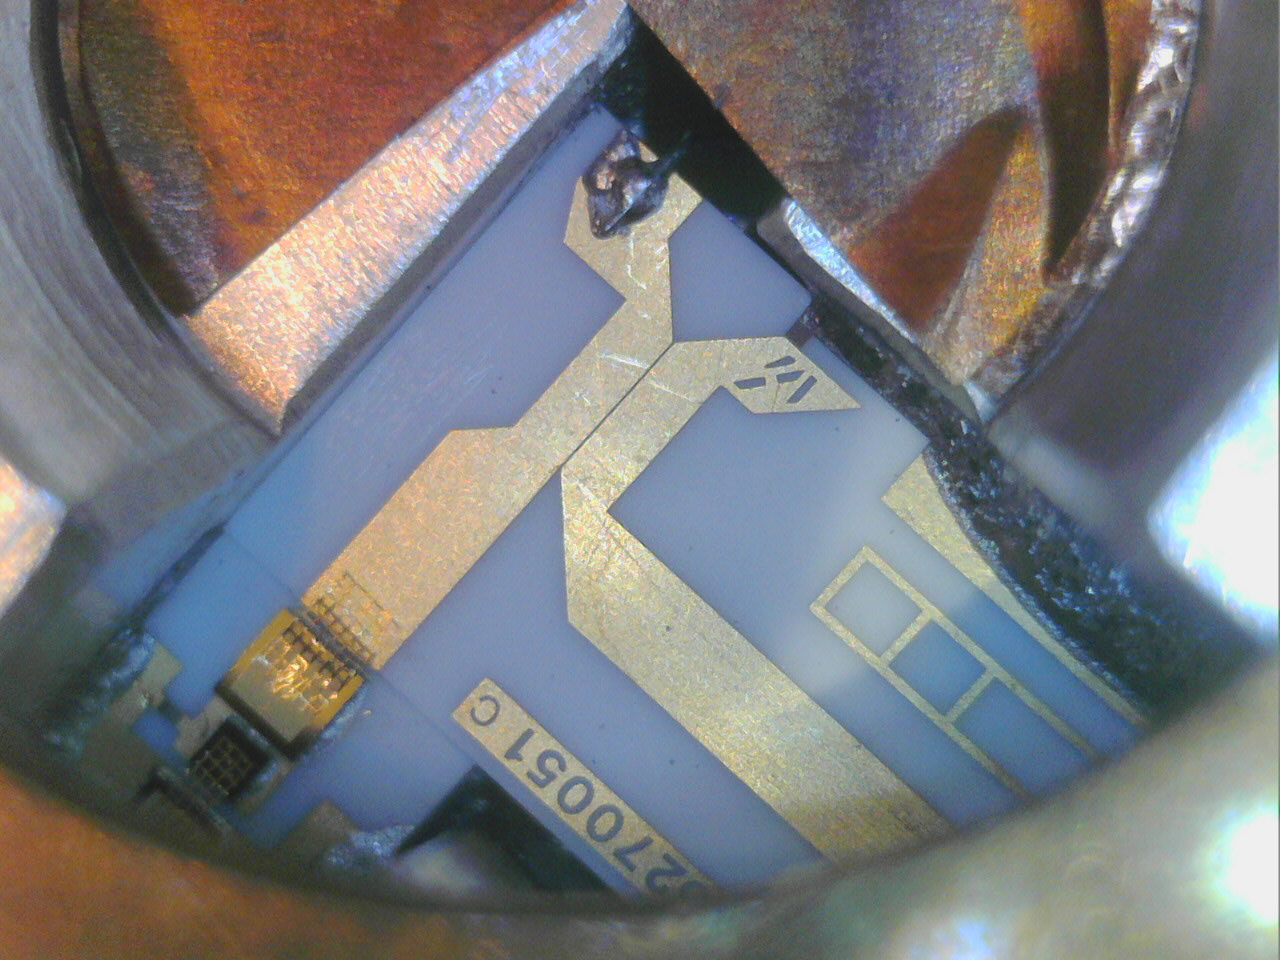 Top view of the YIG filter